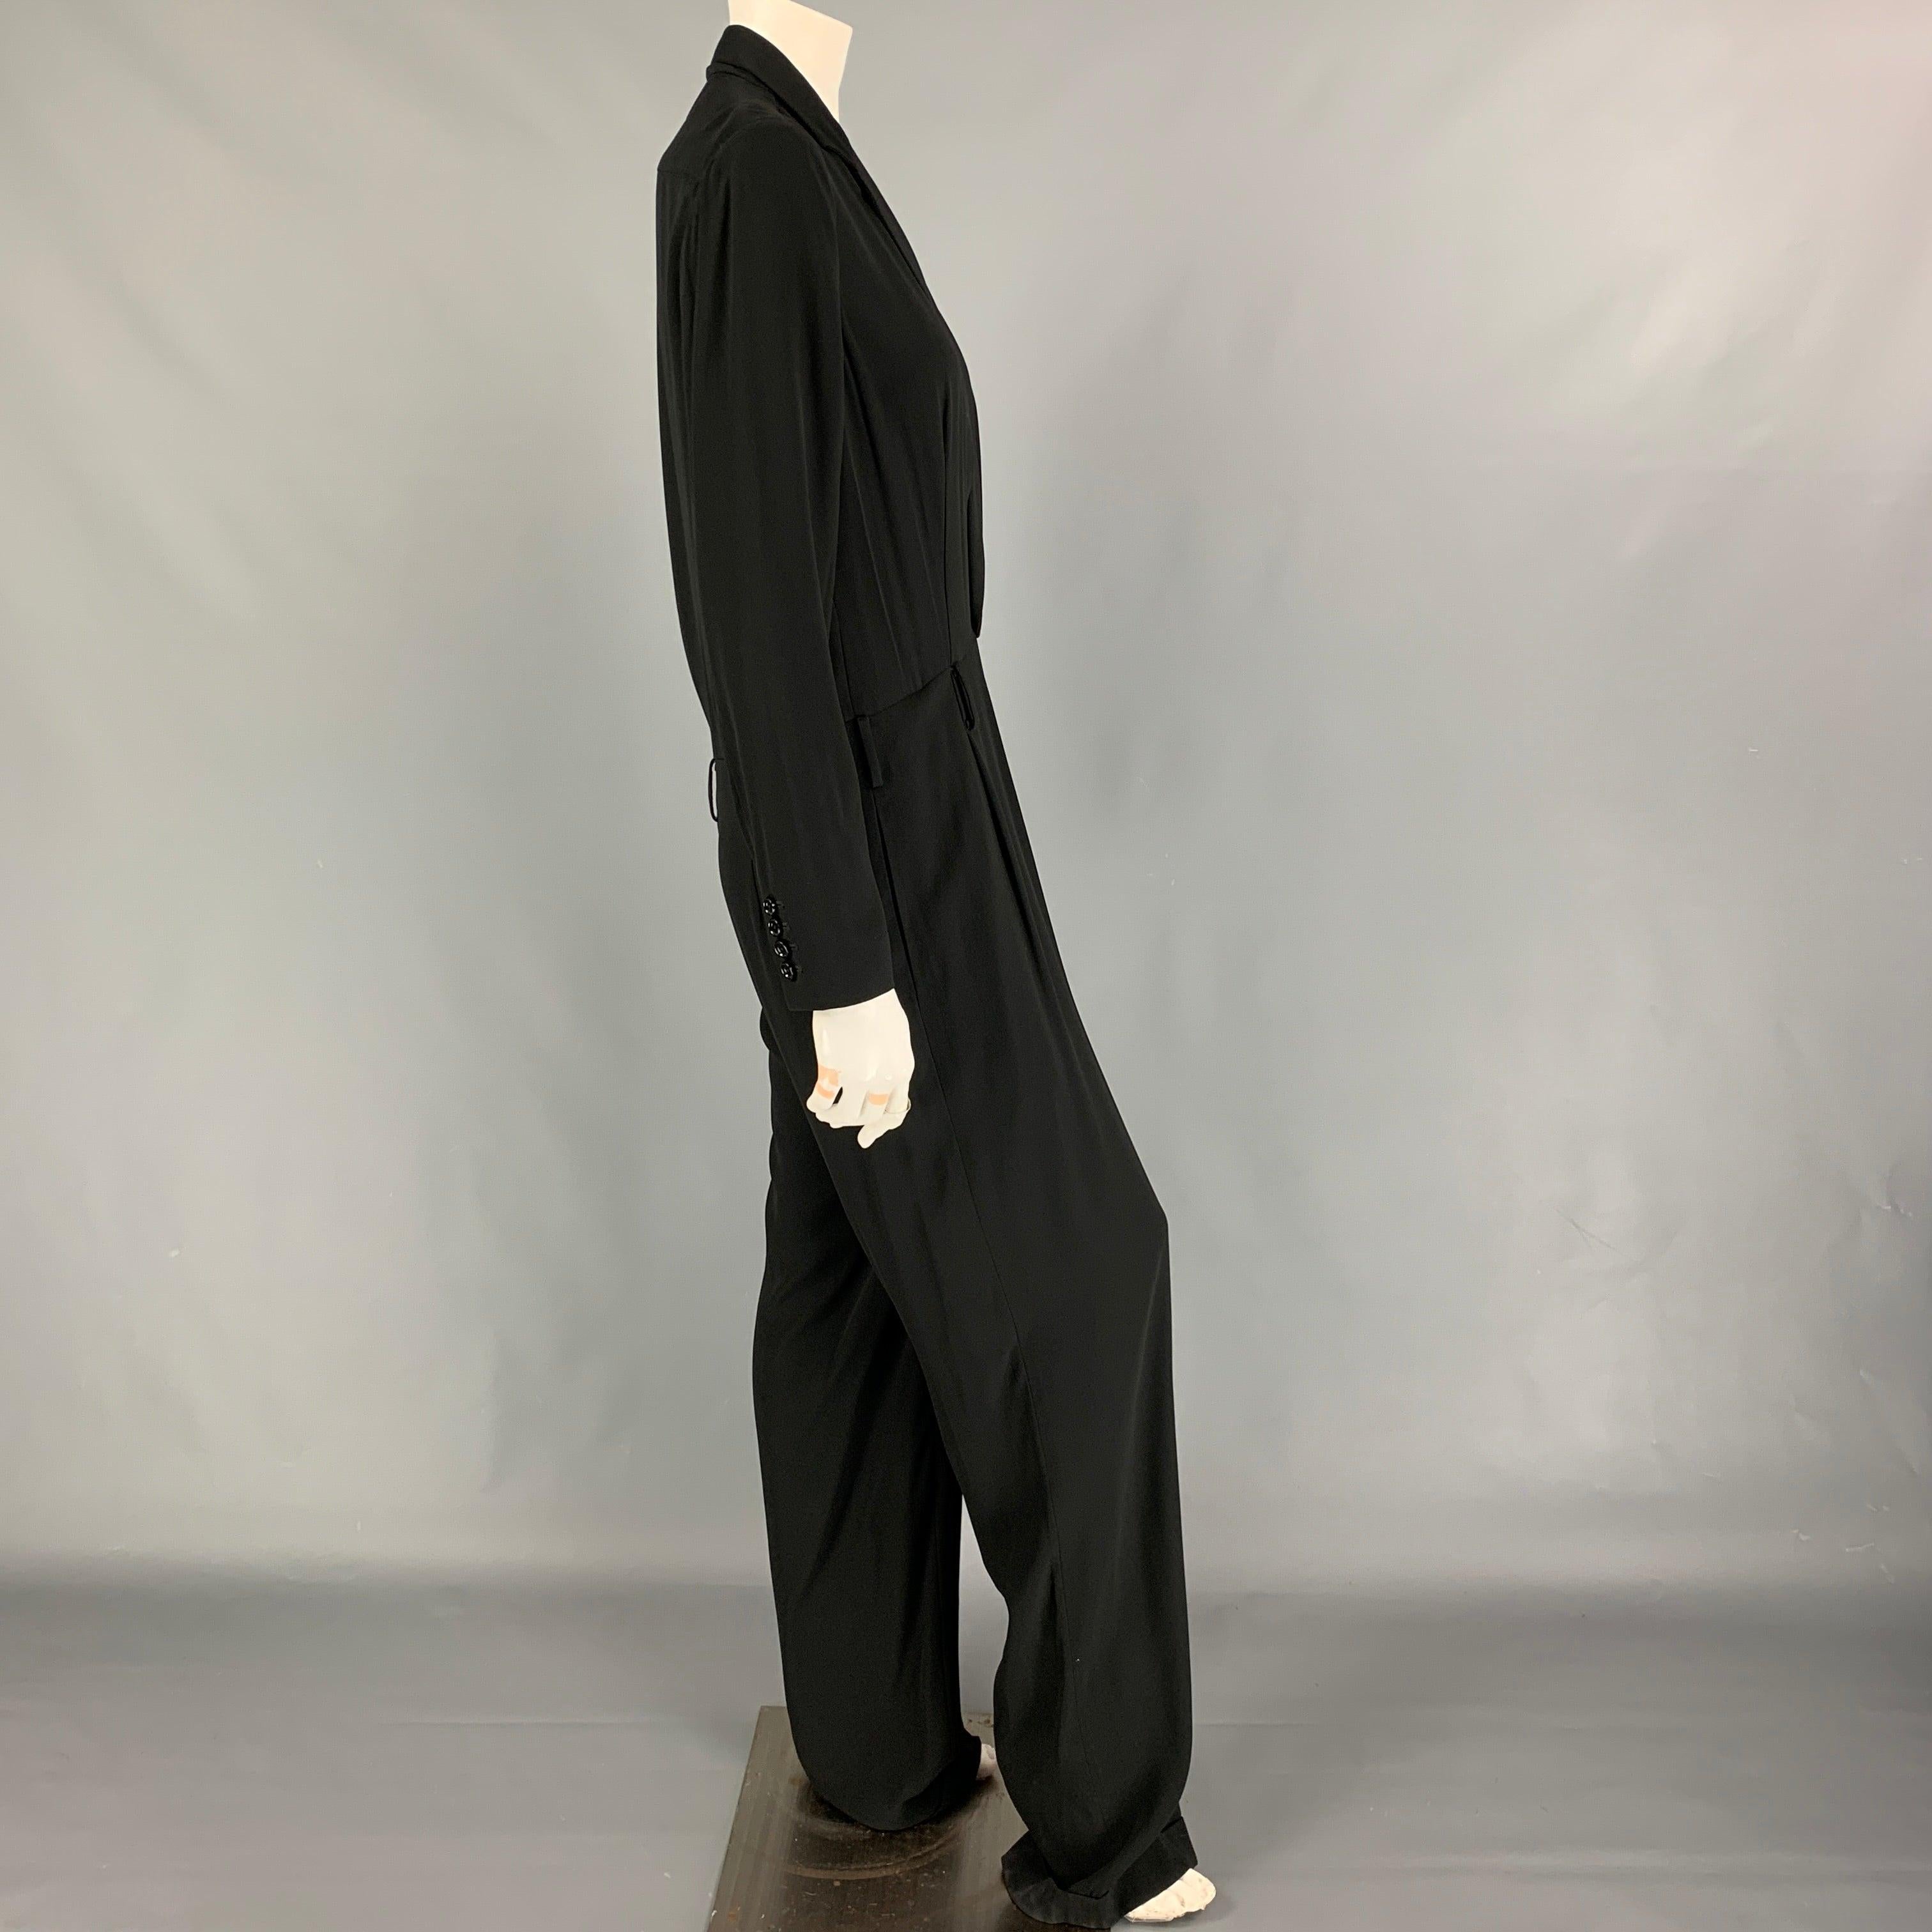 RALPH LAUREN Collection Size 8 Black Viscose Acetate Jumpsuit In Good Condition For Sale In San Francisco, CA